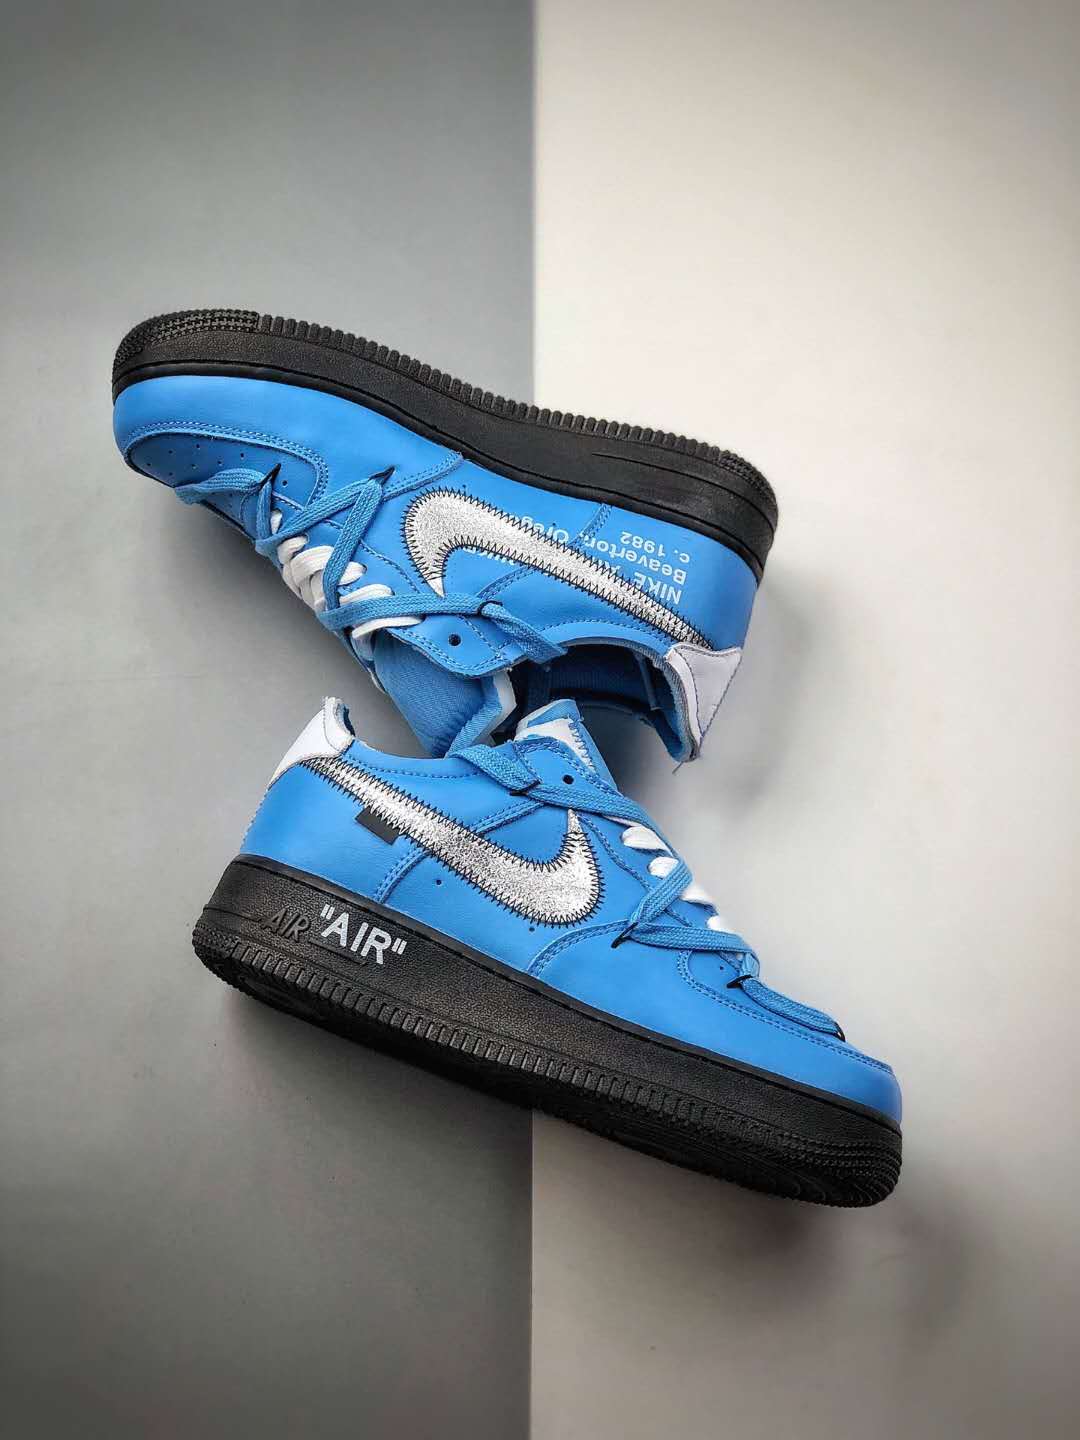 Nike Off-White Air Force 1 "MCA Sample" Blue Silver CK0866-401 | Limited Edition Sneakers